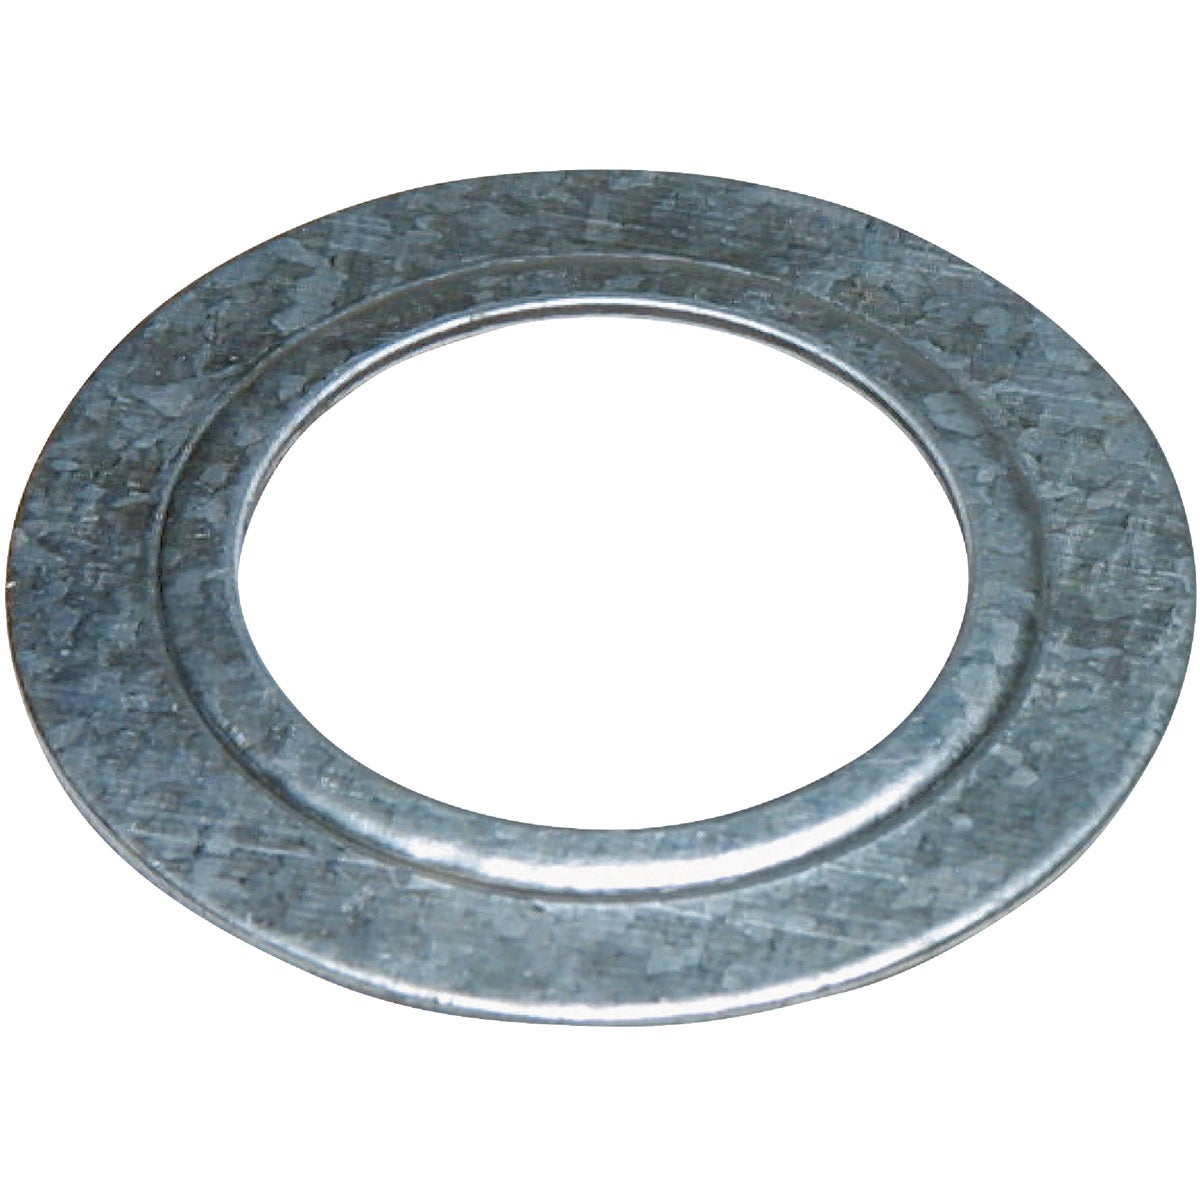 Sigma Engineered Solutions ProConnex 1 to 3/4 In. Zinc-Plated Steel Rigid/IMC Reducing Washer (2-Pack)